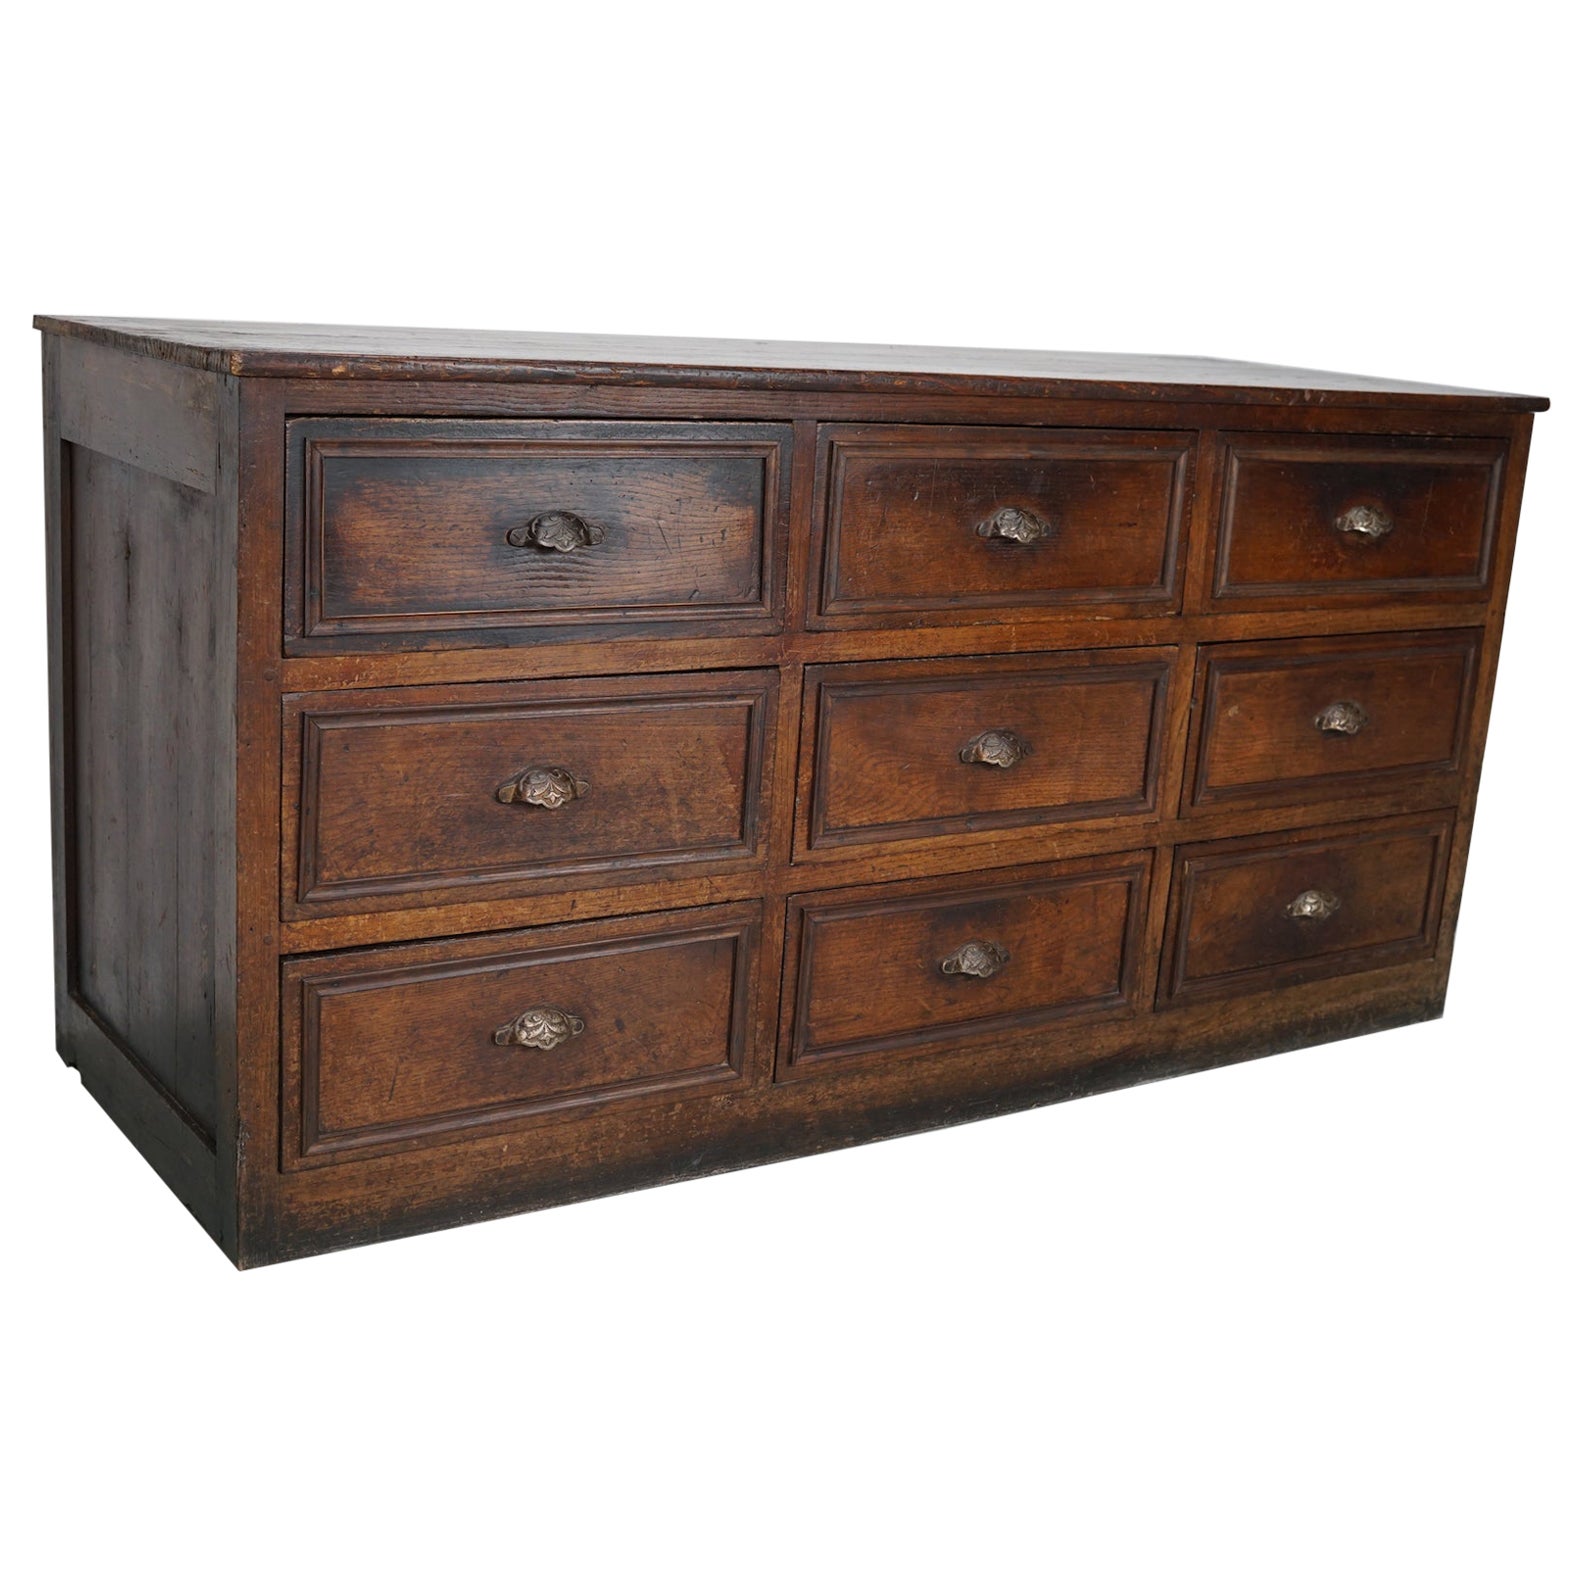 Antique French Oak & Fruitwood Apothecary / Filing Cabinet, Early 20th Century For Sale